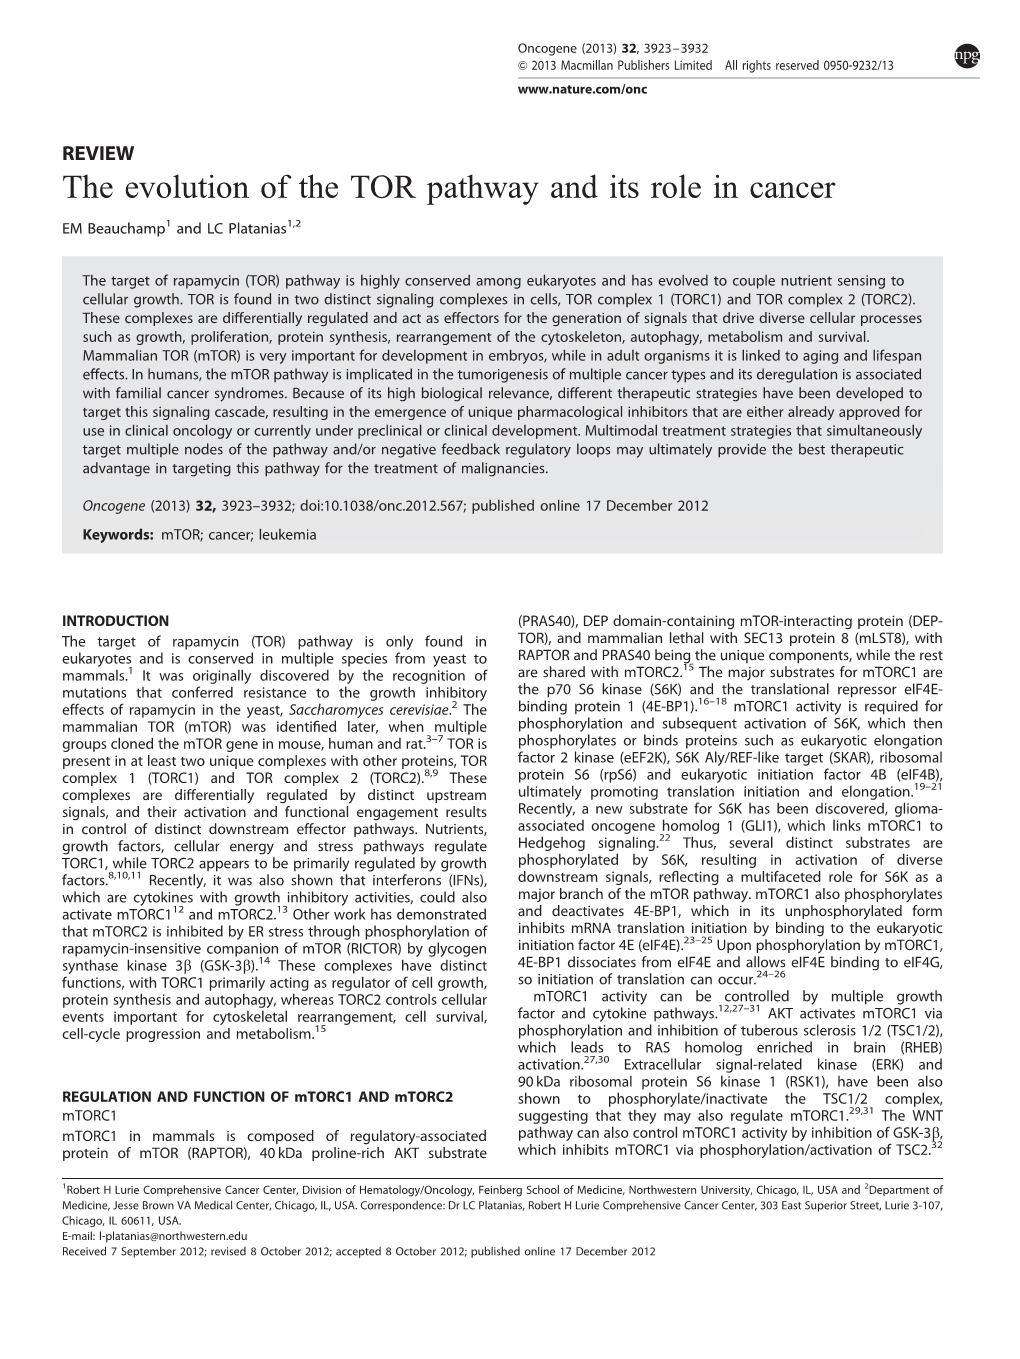 The Evolution of the TOR Pathway and Its Role in Cancer